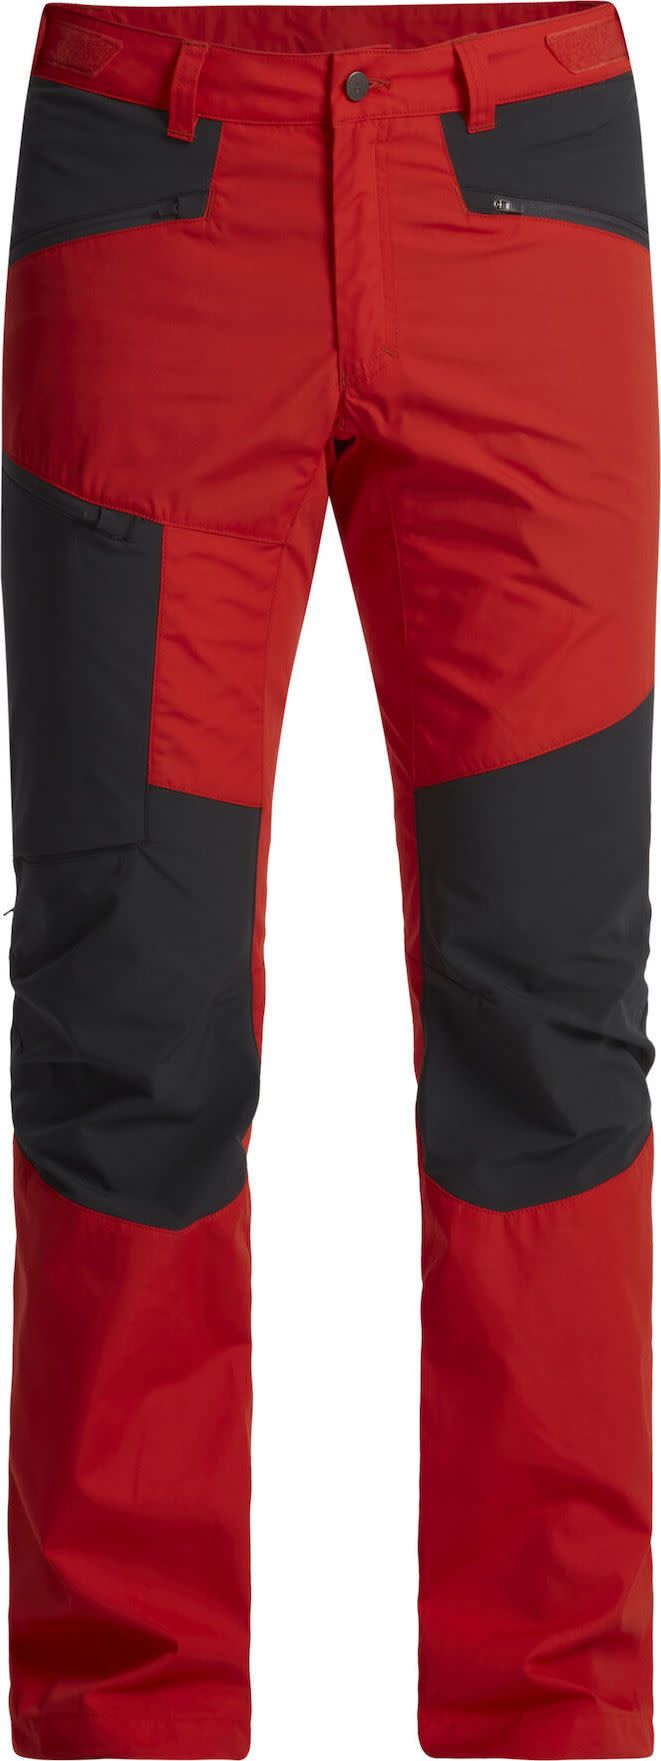 Lundhags Men's Makke Light Pant Lively Red/Charcoal